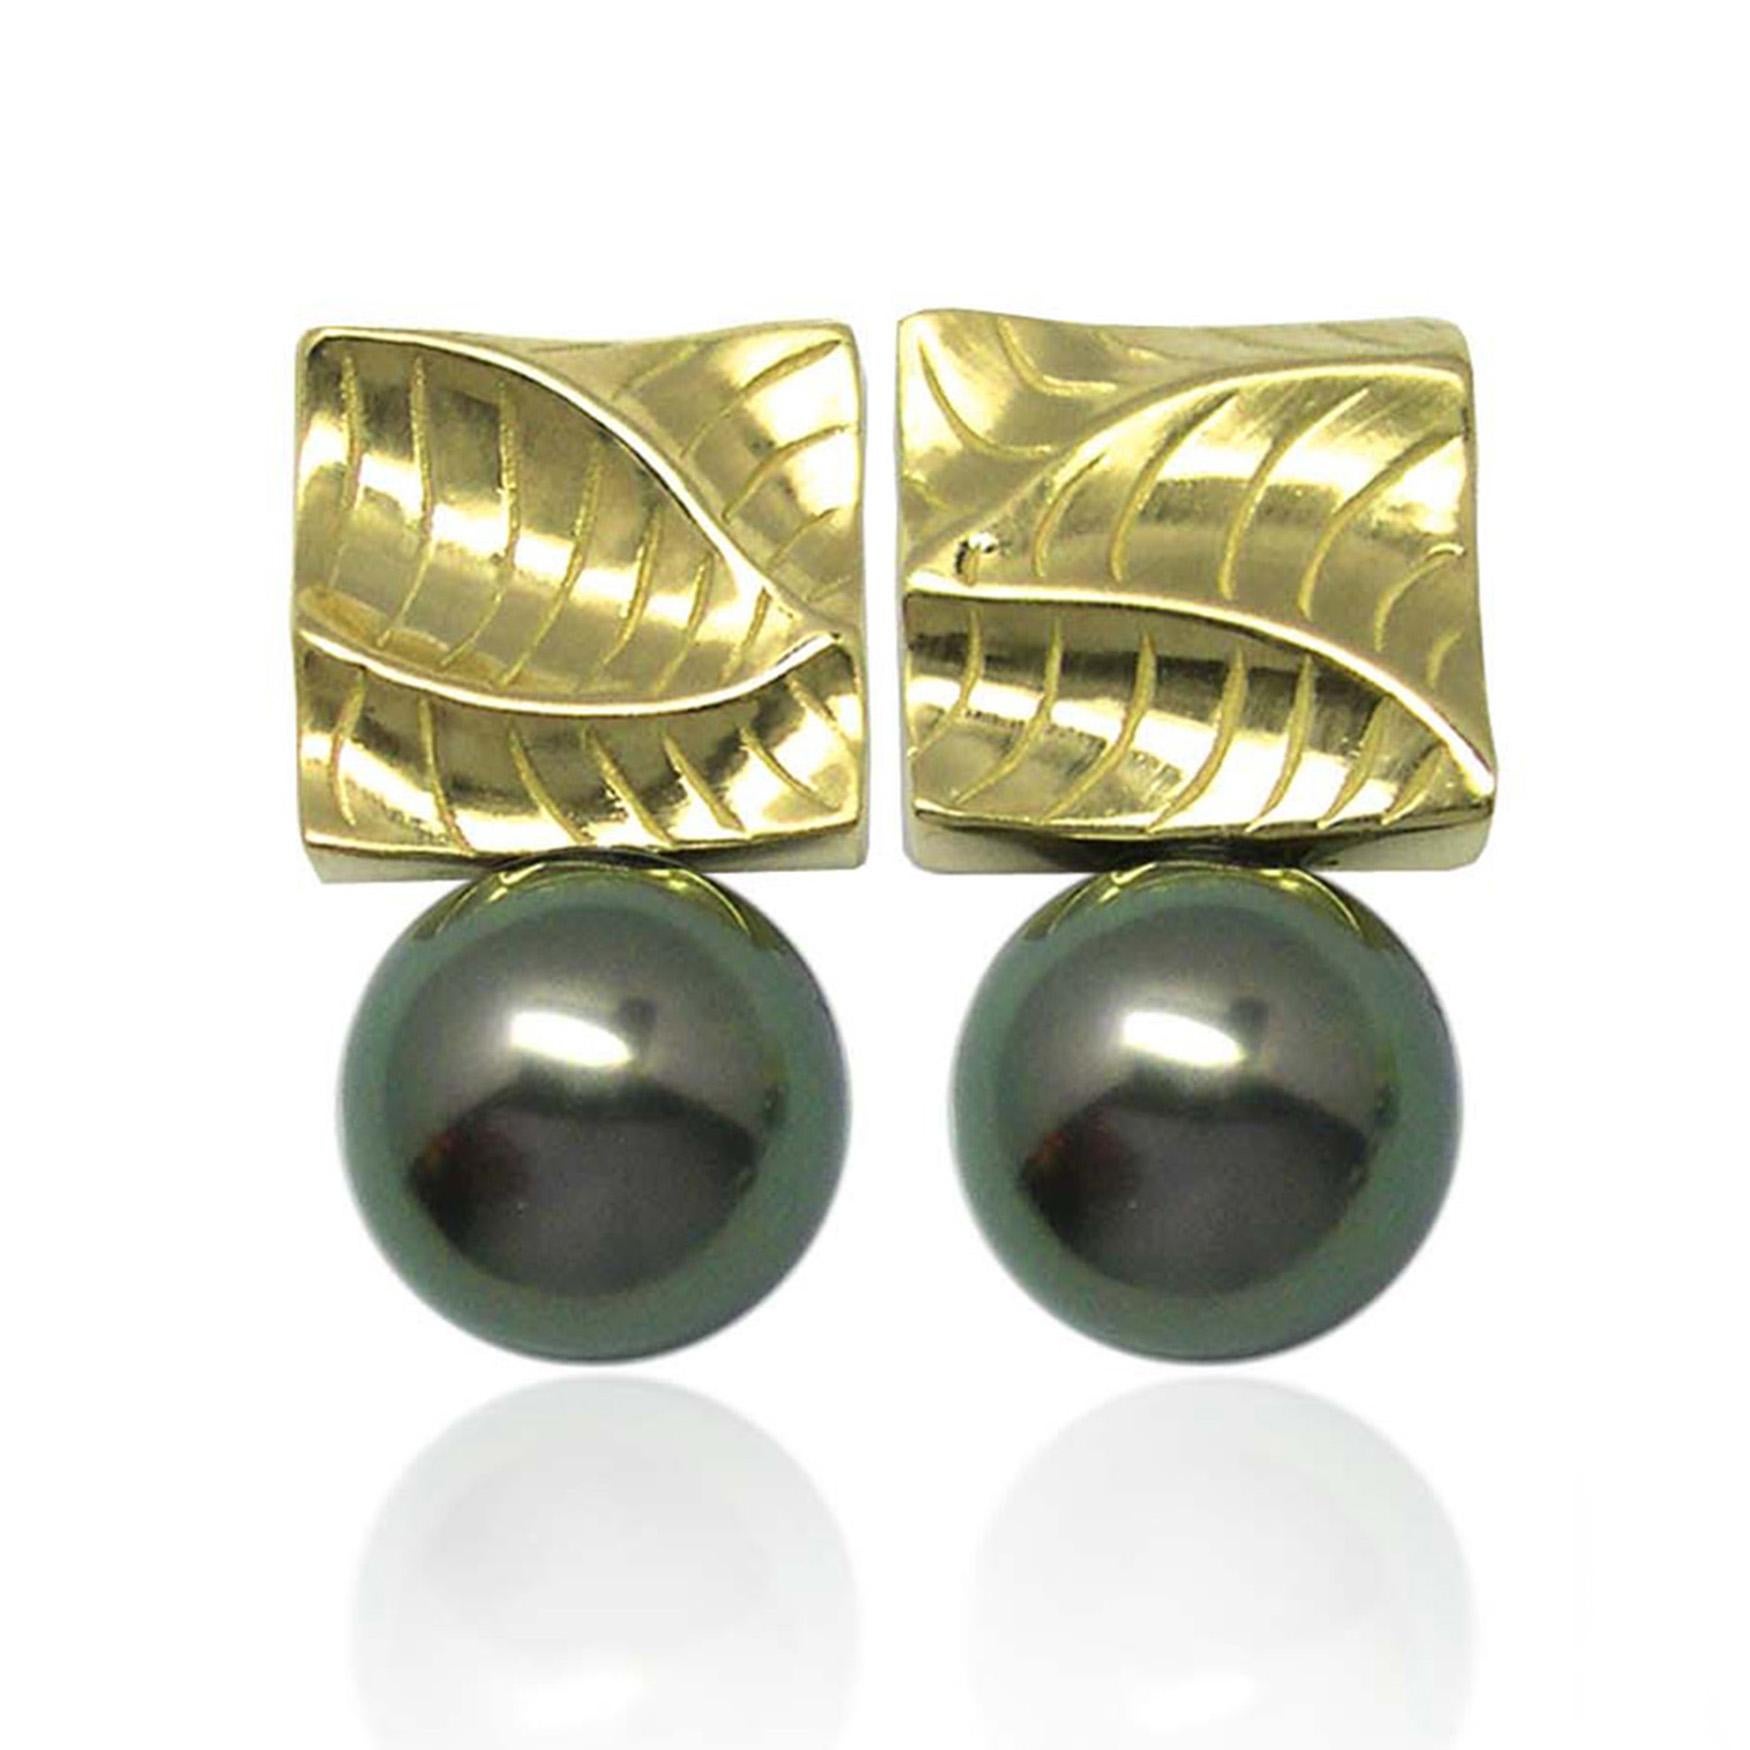 Keiko Mita’s Small Square Pearl Earrings are handmade from 14 Karat Yellow Gold. The contemporary earrings, which are 18 mm long and 10 mm wide, feature 8.5 mm Tahitian Pearls and the artist’s signature Dune texture. These unique earrings from her